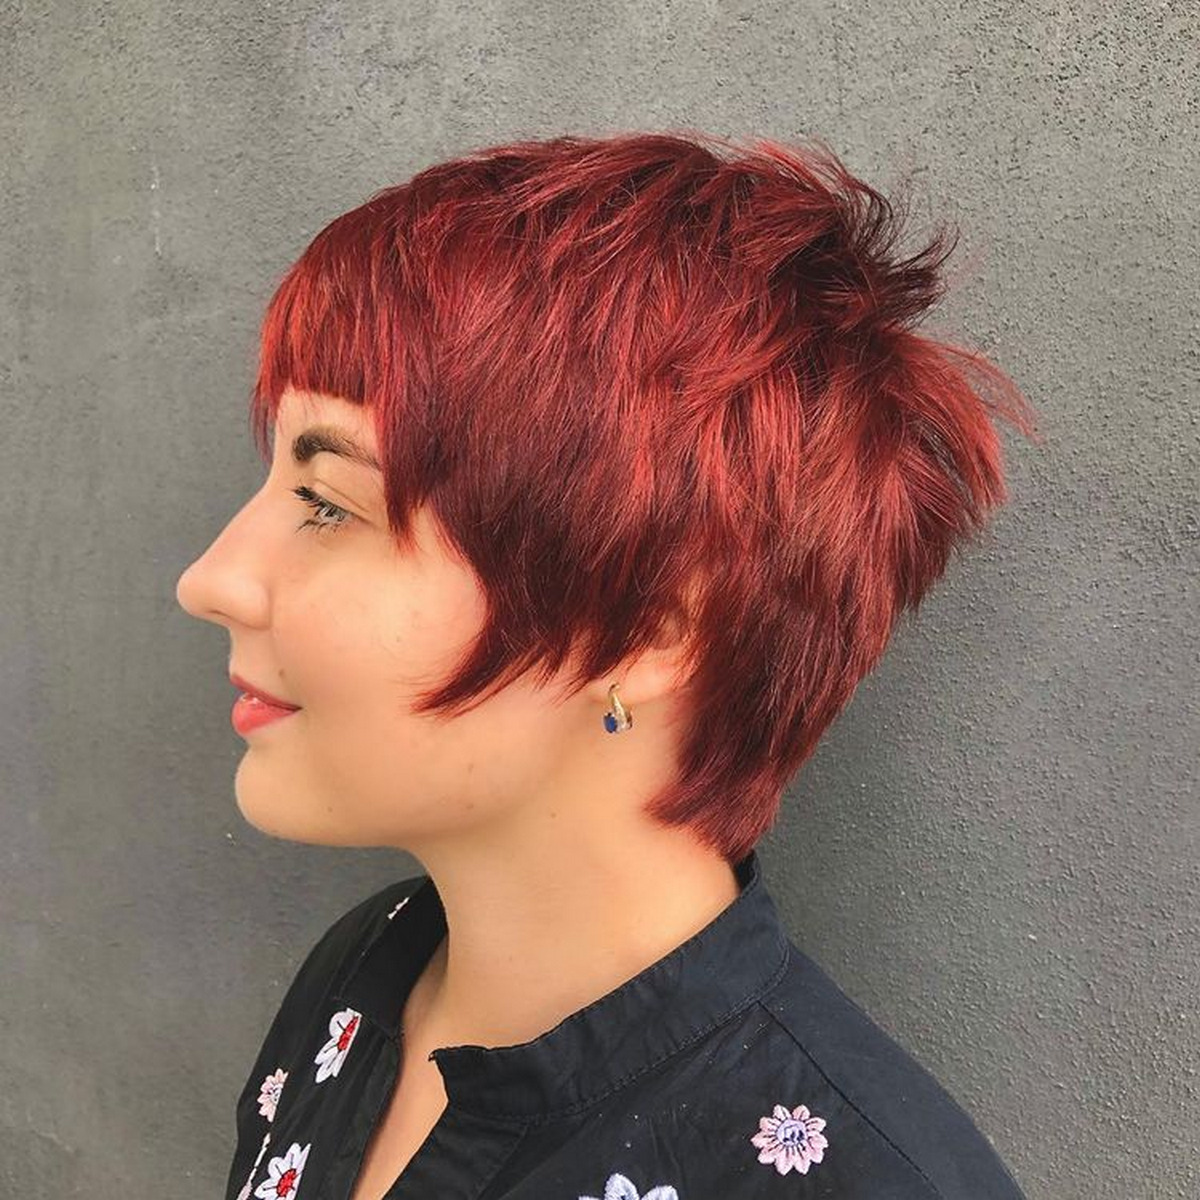 Fiery Red Short Hair With Bangs